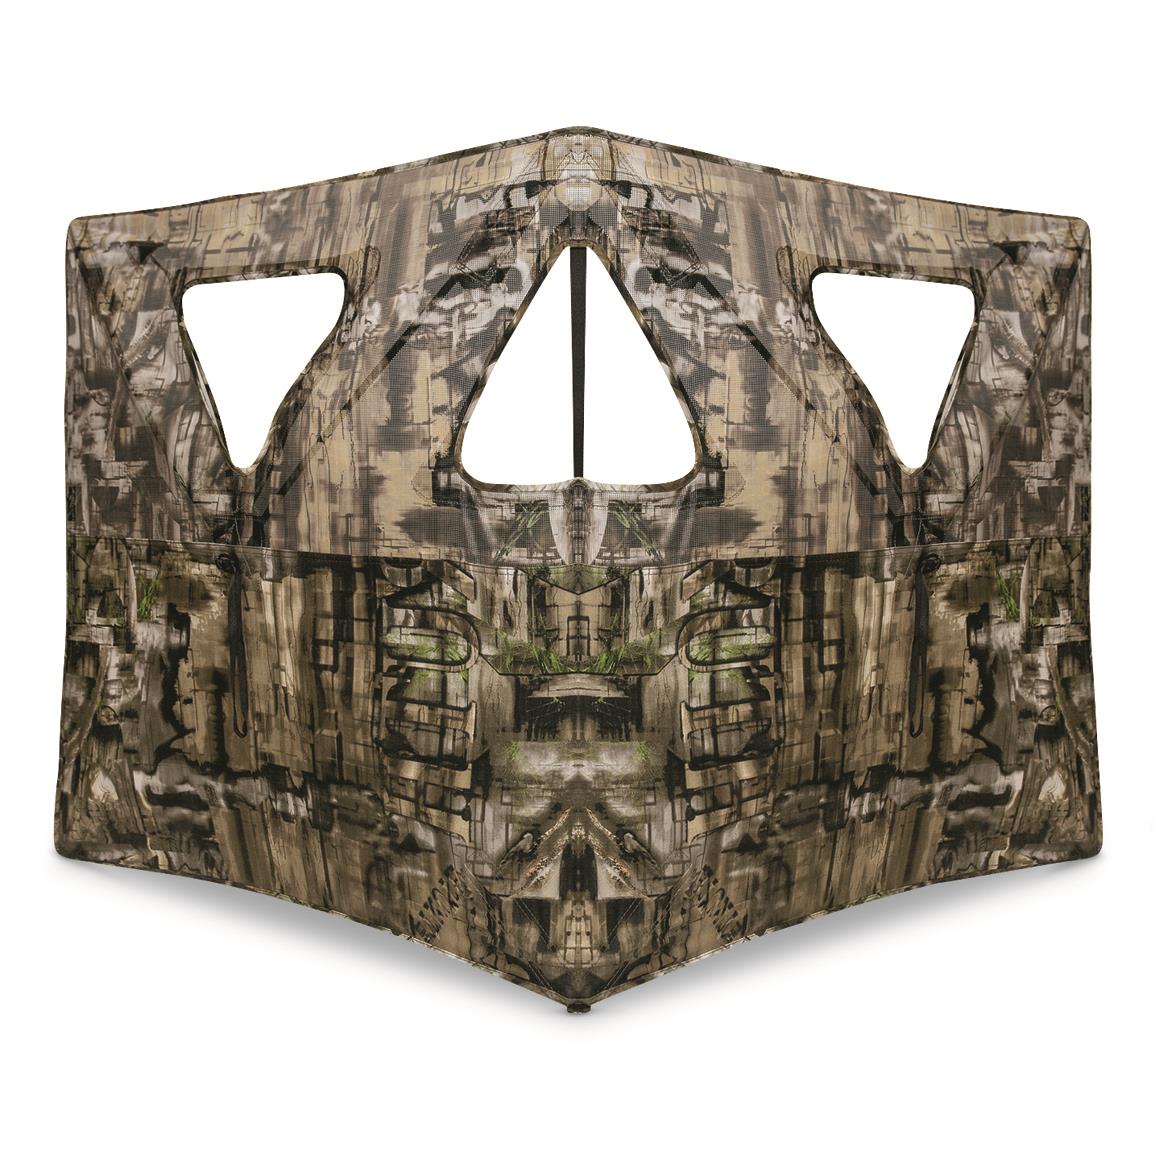 Primos Double Bull Surroundview Stake-Out Blind